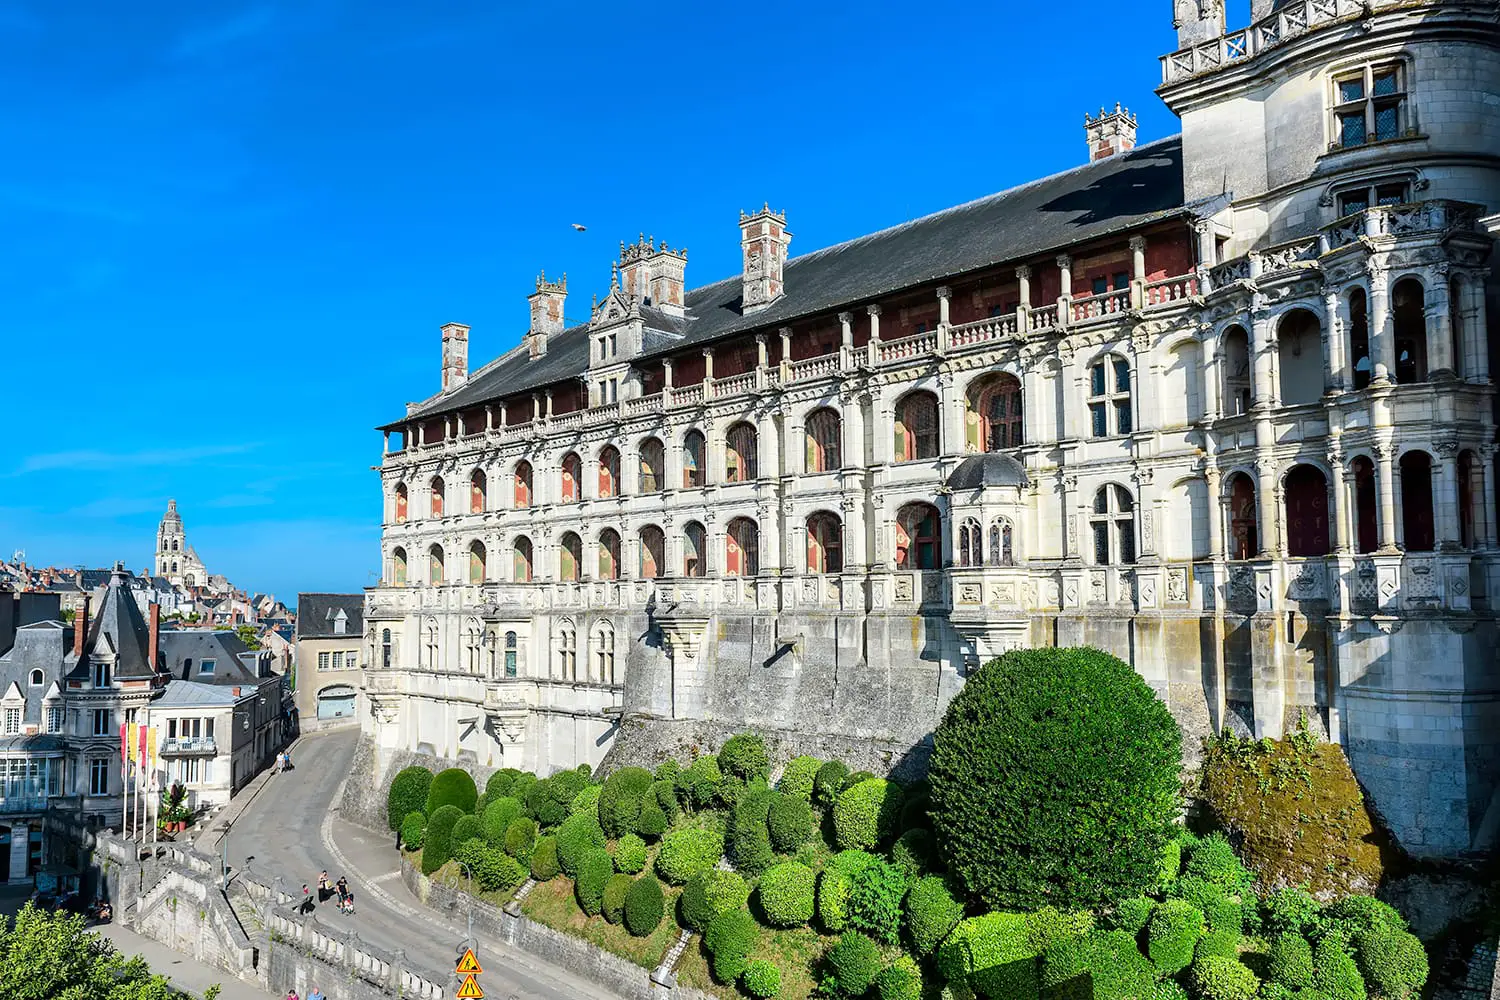 The Royal Palace of Castle of Blois (Chateau de Blois). Included in the top ten castles of the Loire Valley, France,